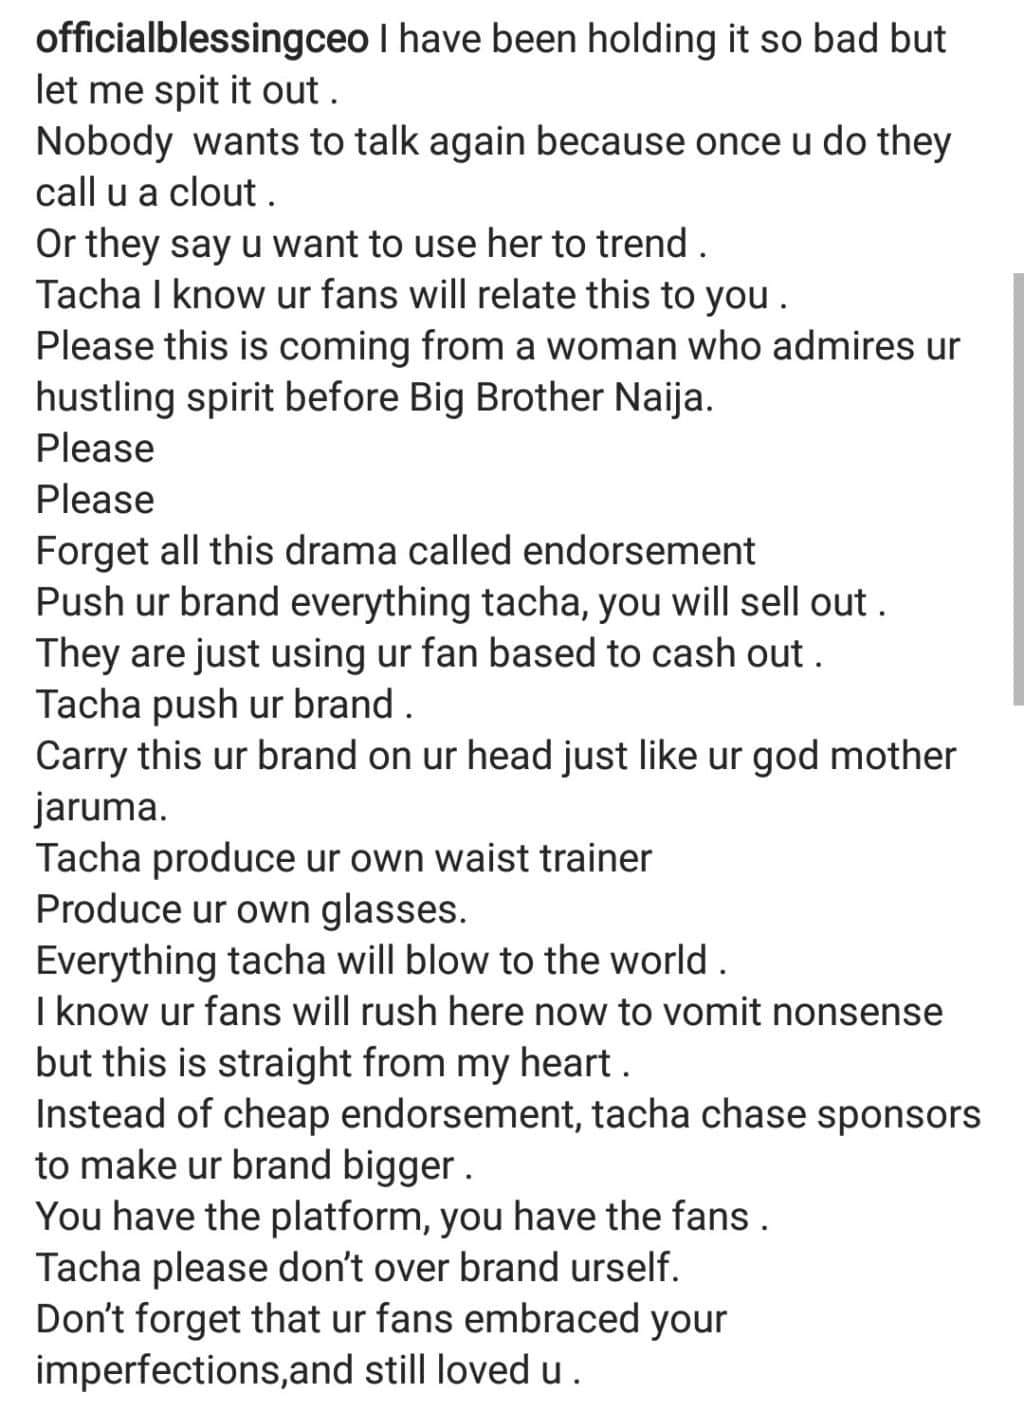 'You have the platform, you have the fans'- Blessing Okoro advises Tacha to focus on growing her own brand